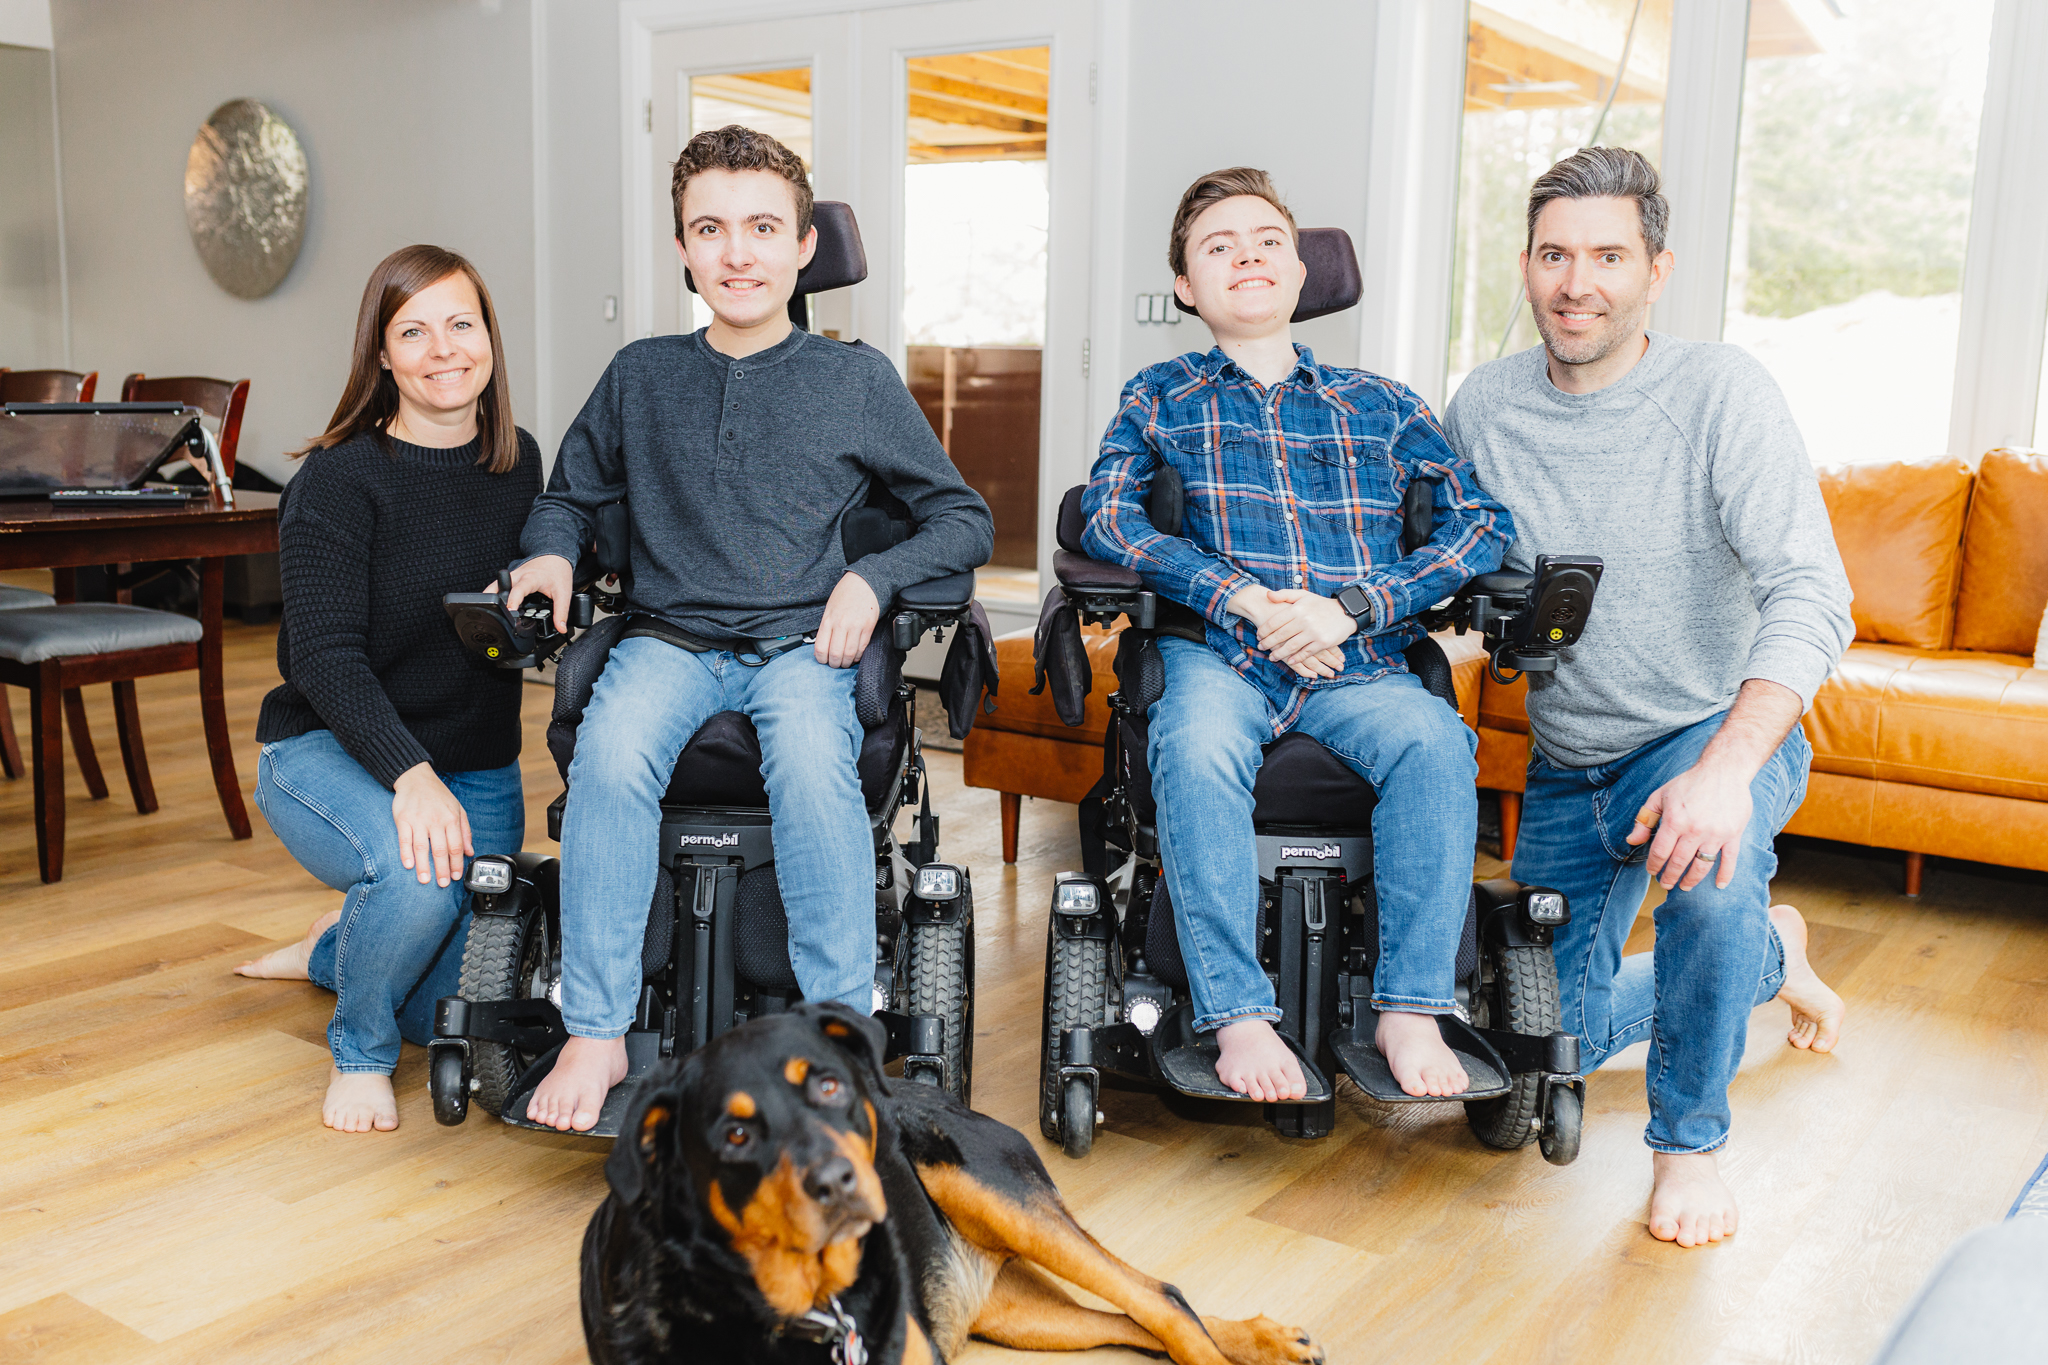 The Cavalier family pose in their living room for a family photo. From left to right are Emily, her sons Liam and Kaleb, and husband Josh. Lying in front of them is the family's tan and black large dog, Sydney